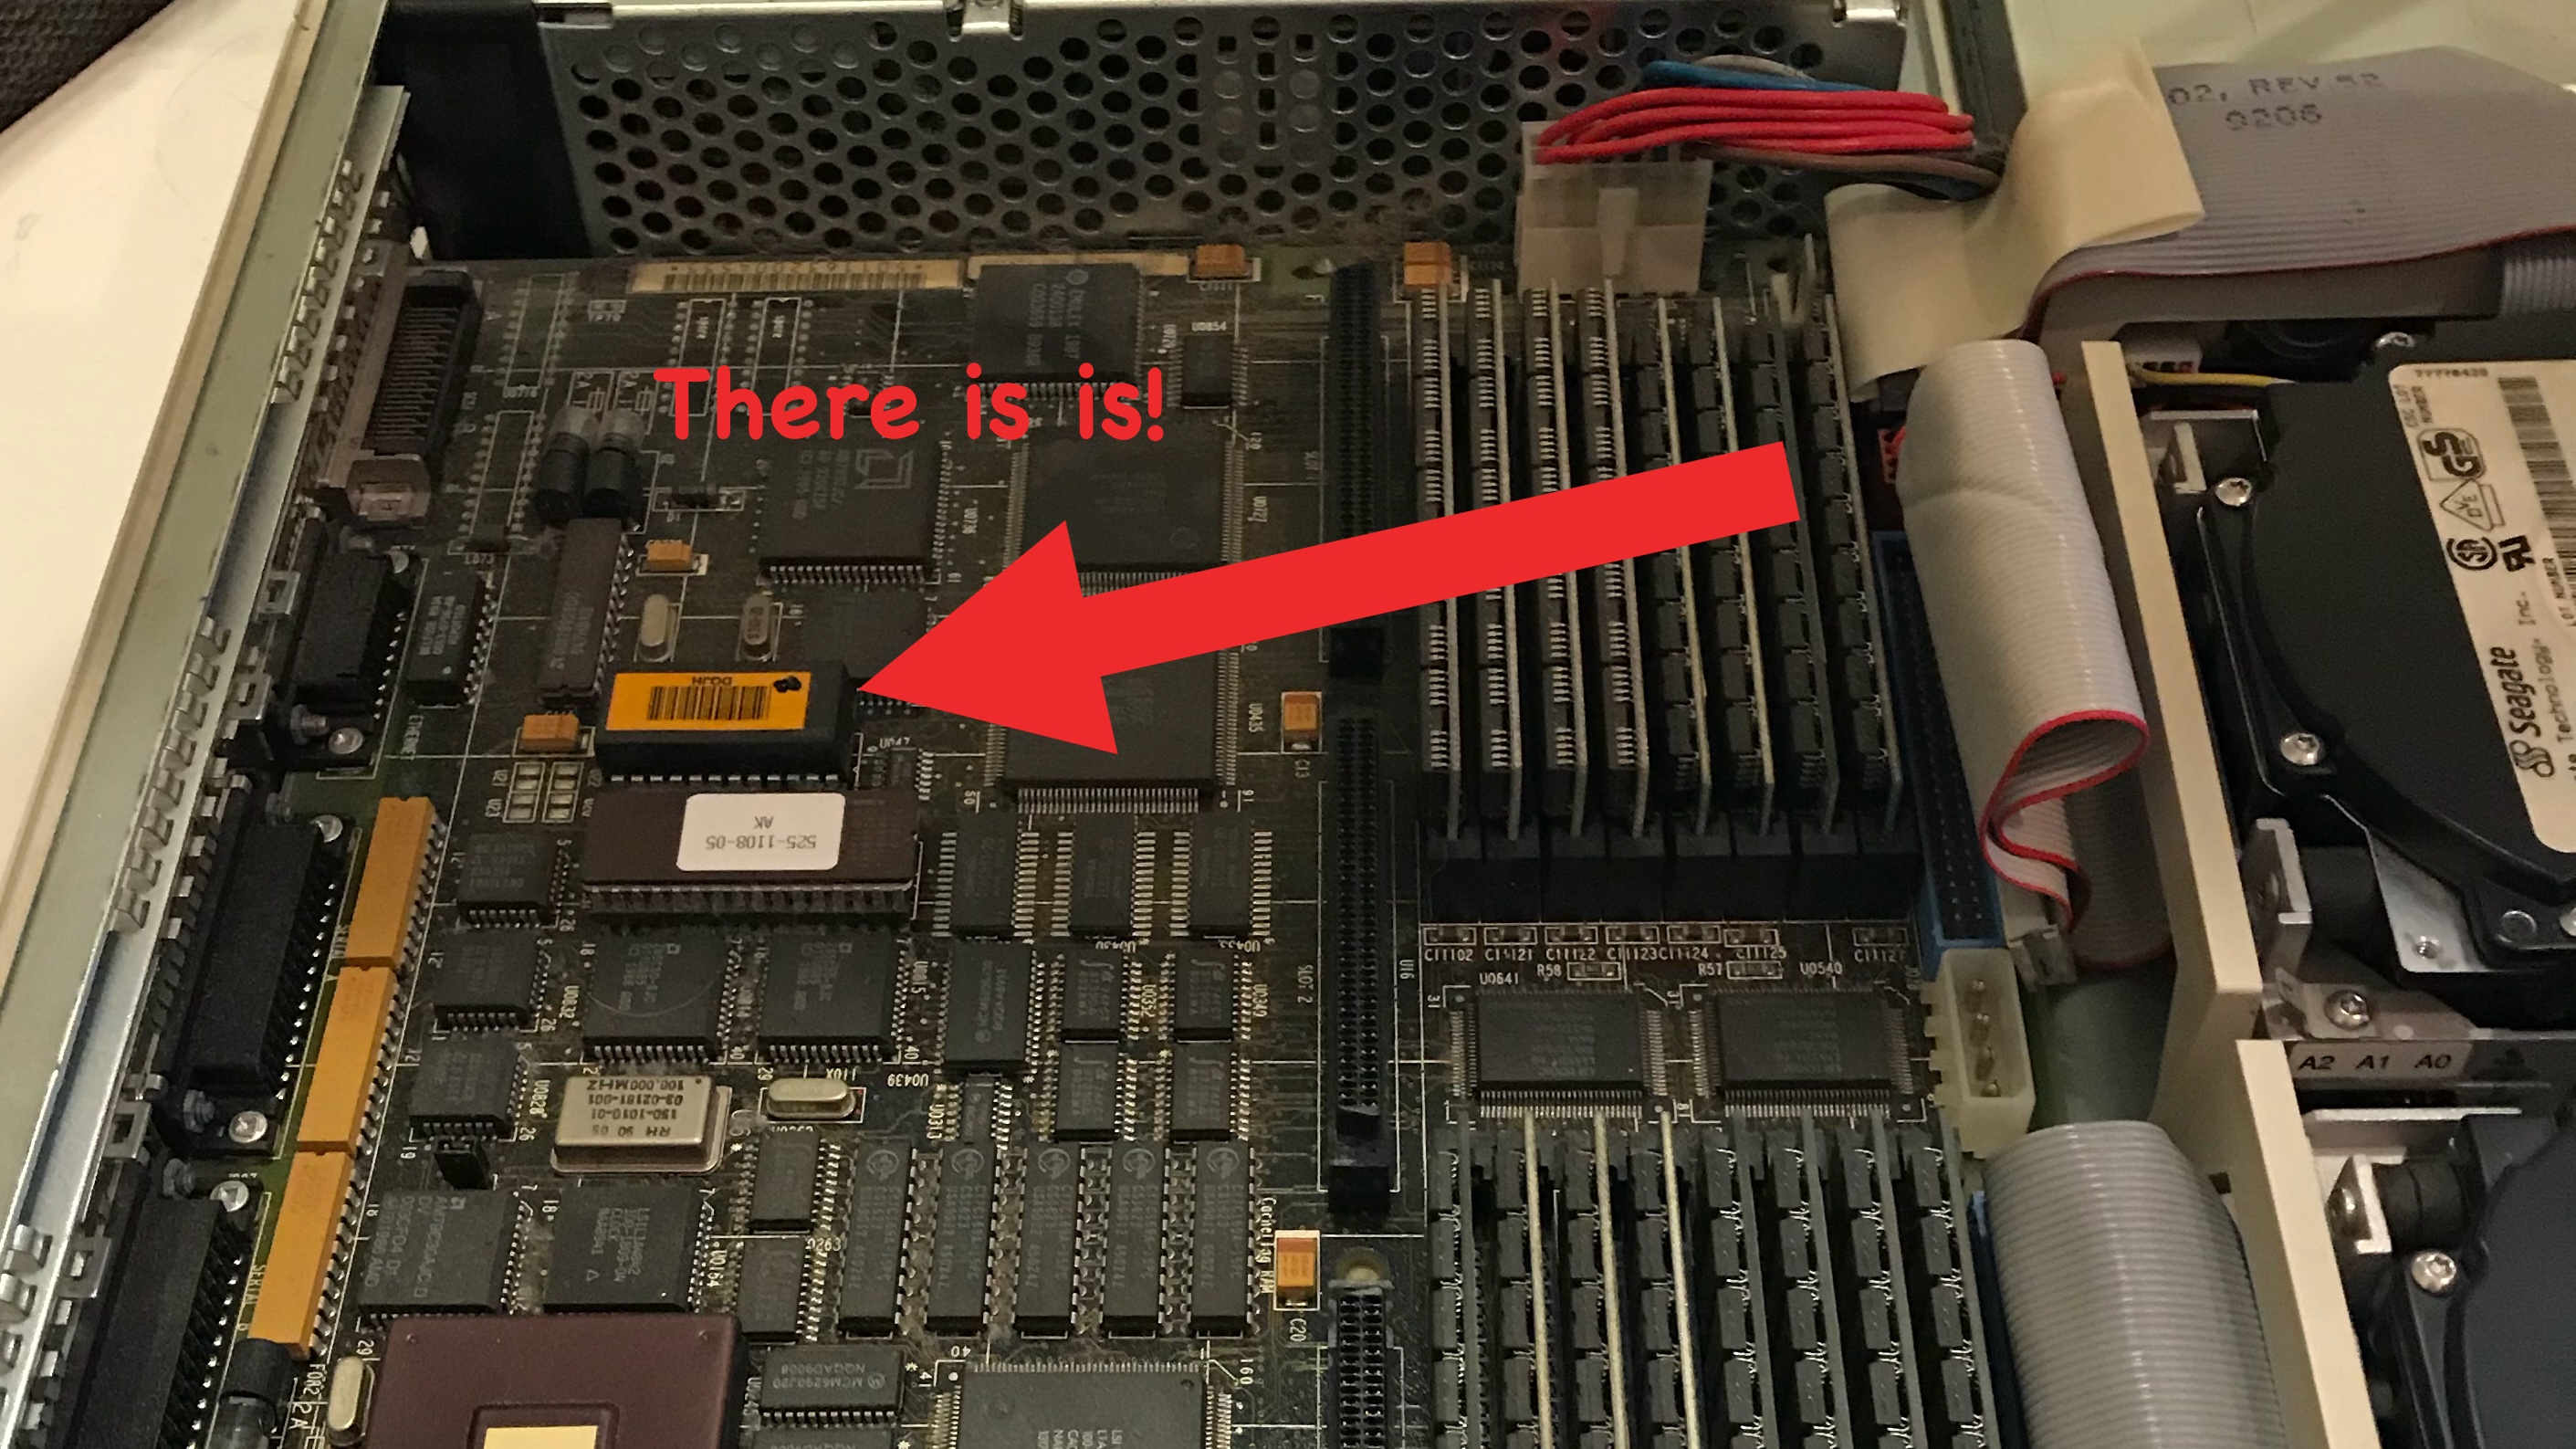 The NVRAM was under the SBus cards!